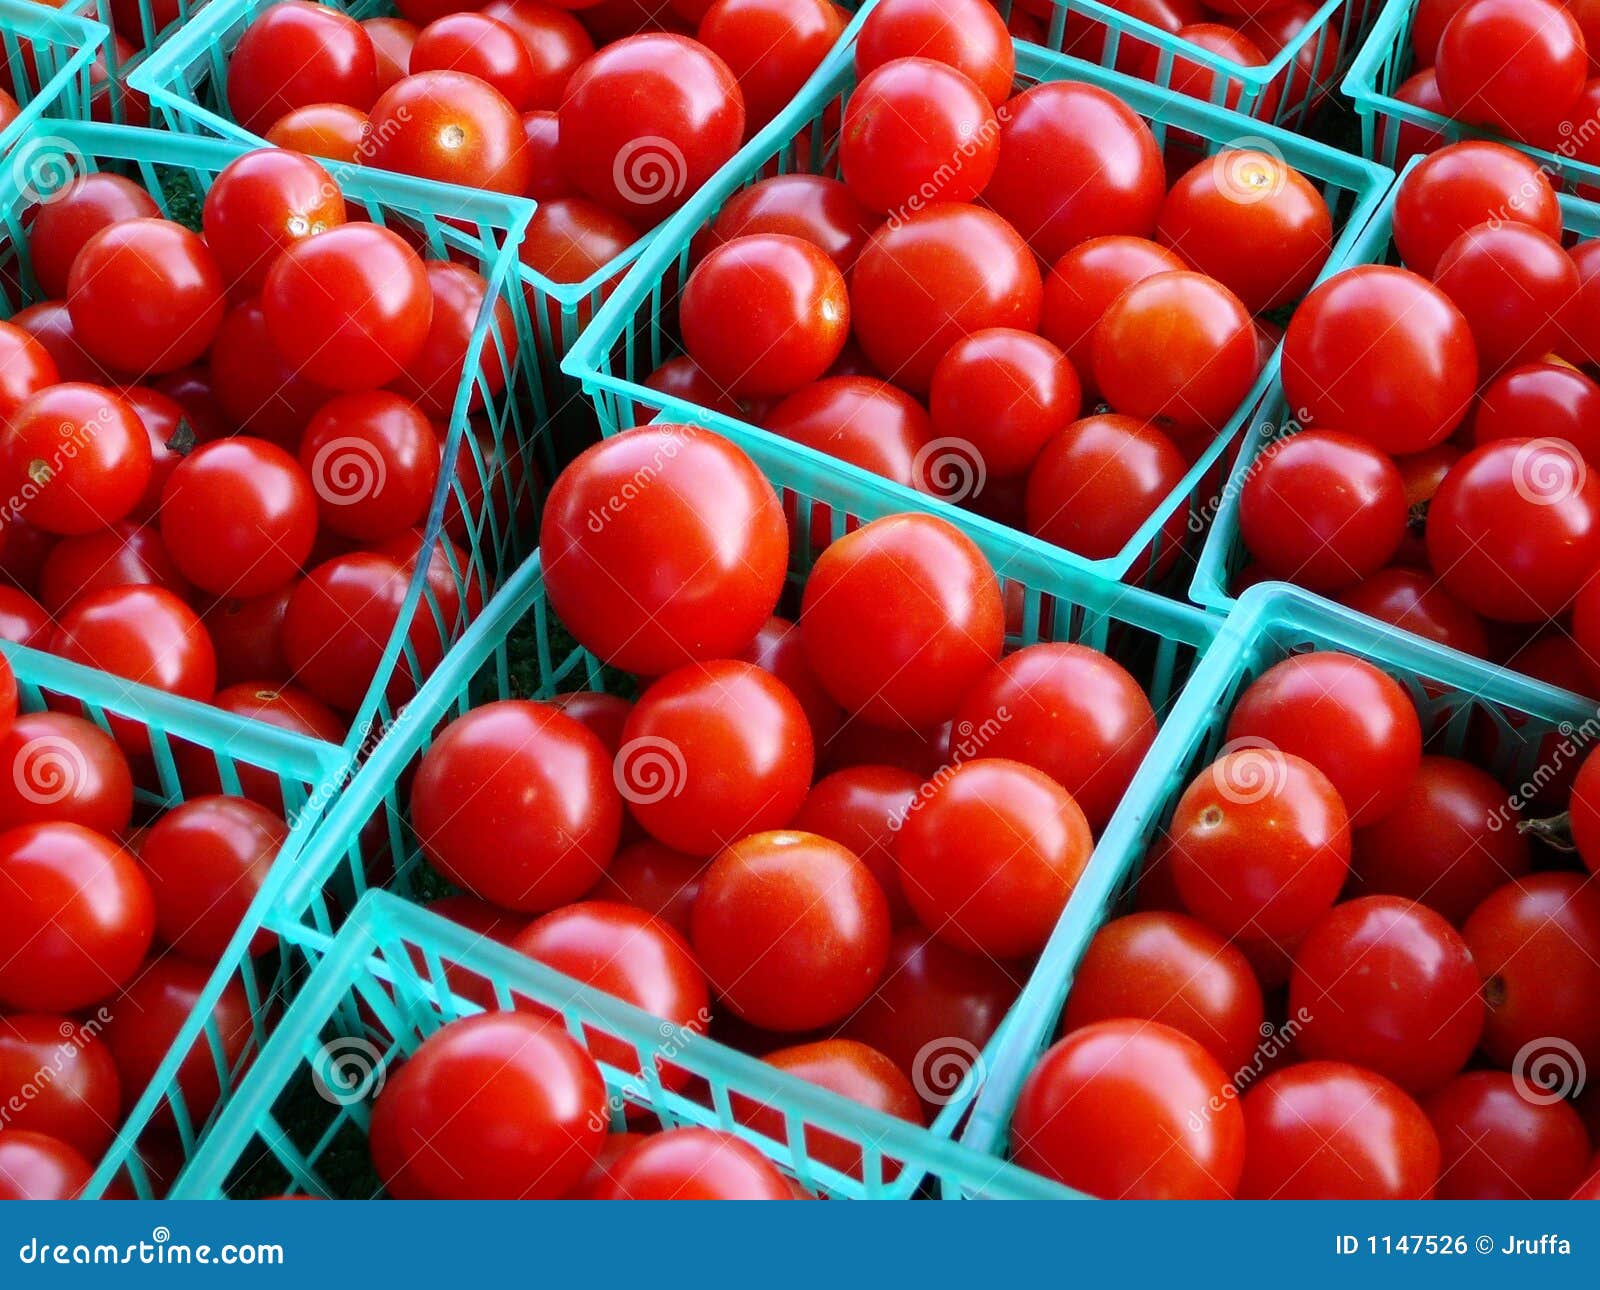 Cherry tomatoes for sale stock photo. Image of ripe, cherry - 1147526